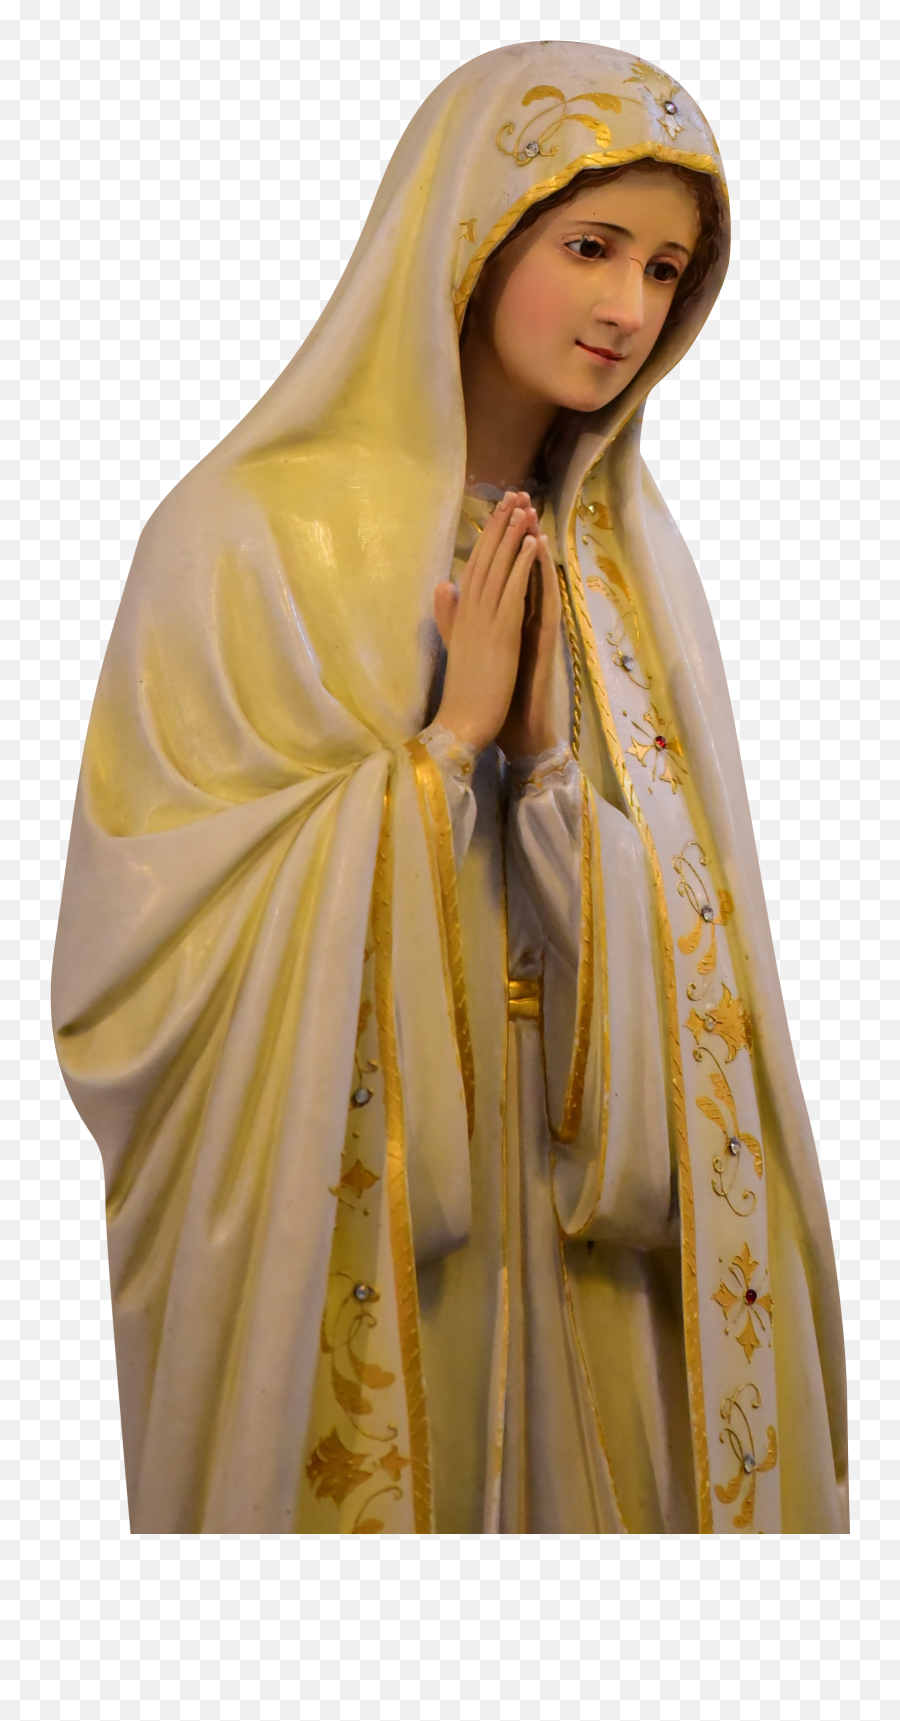 Virgin Mary Statue Transparent - Virgin Mary Statue Png,Virgin Mary Png